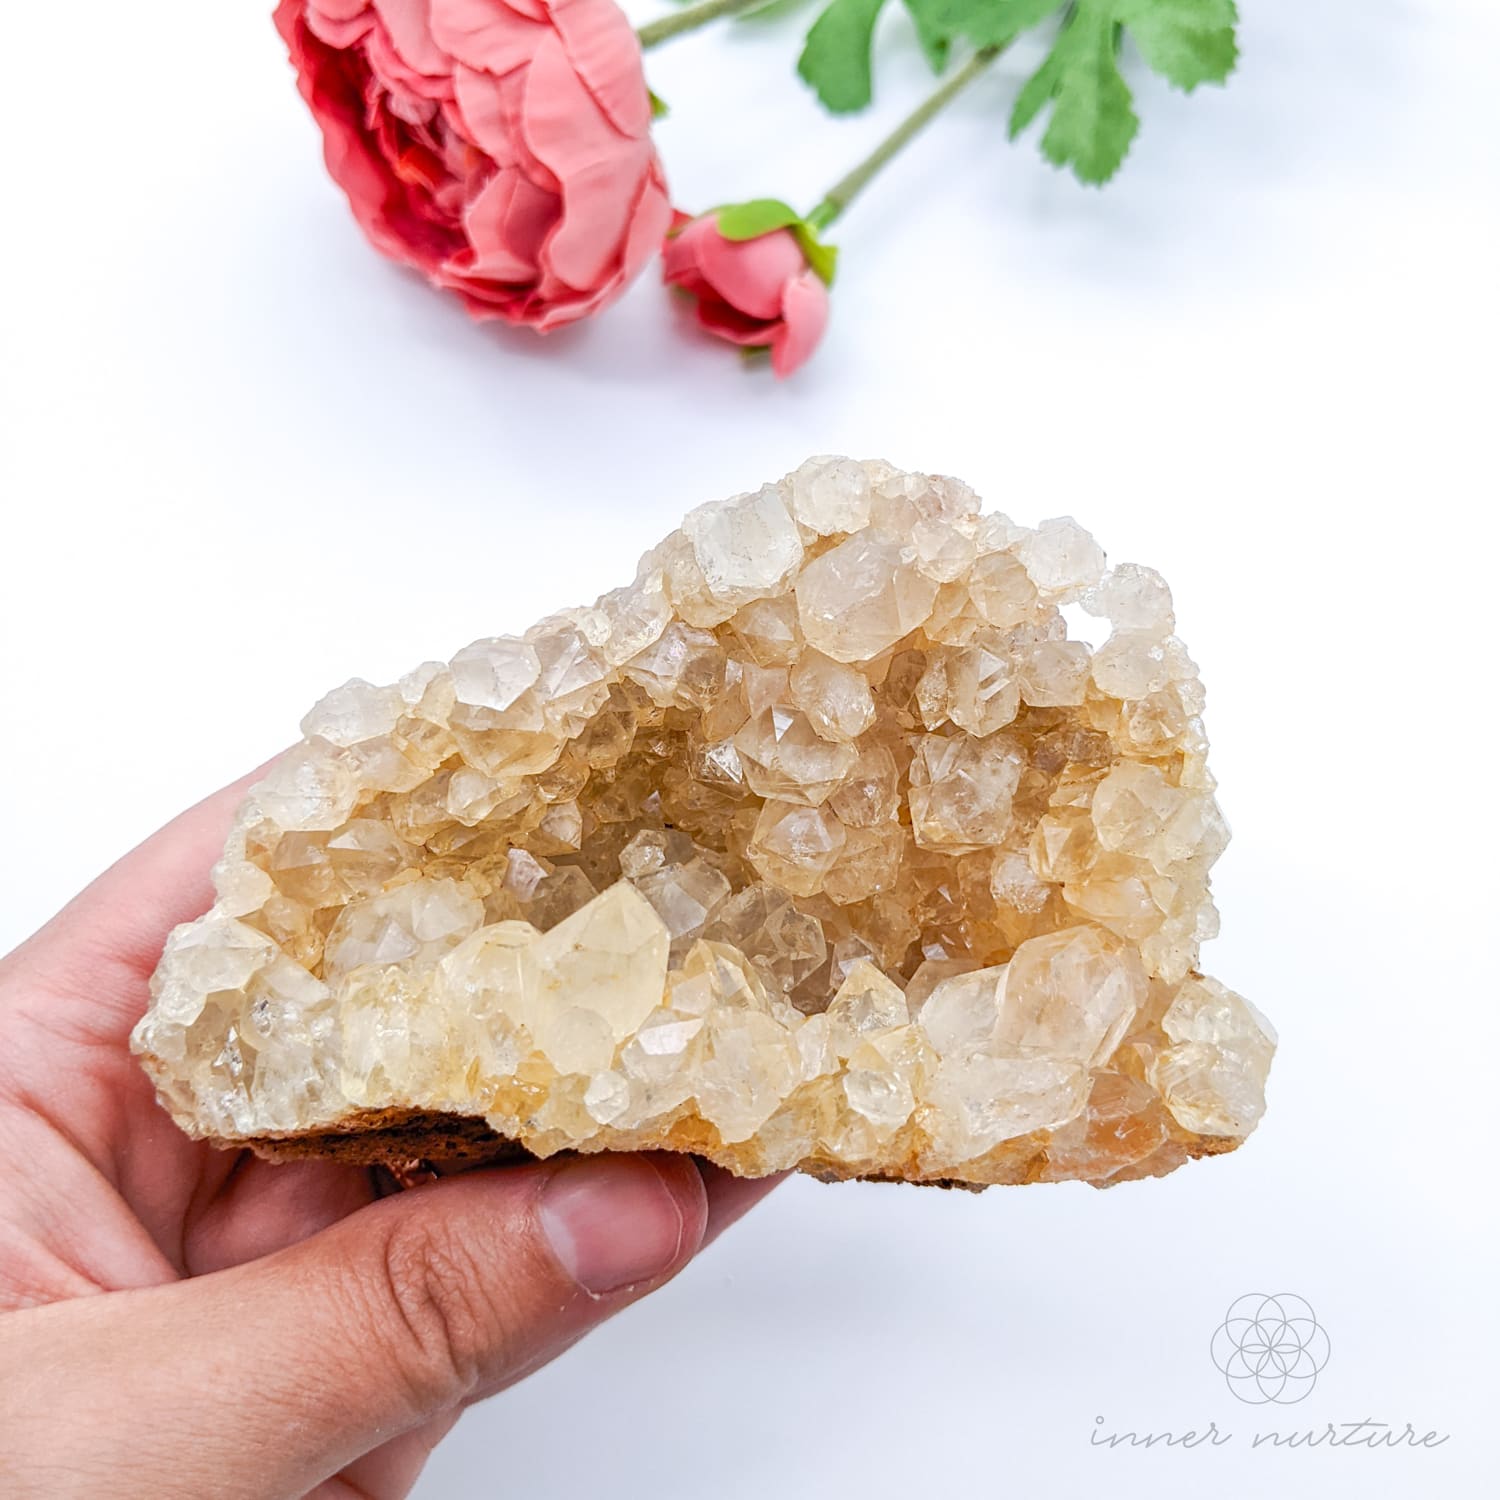 Clear Quartz Cluster With Inclusions - #2 | Crystal Shop Australia - Inner Nurture